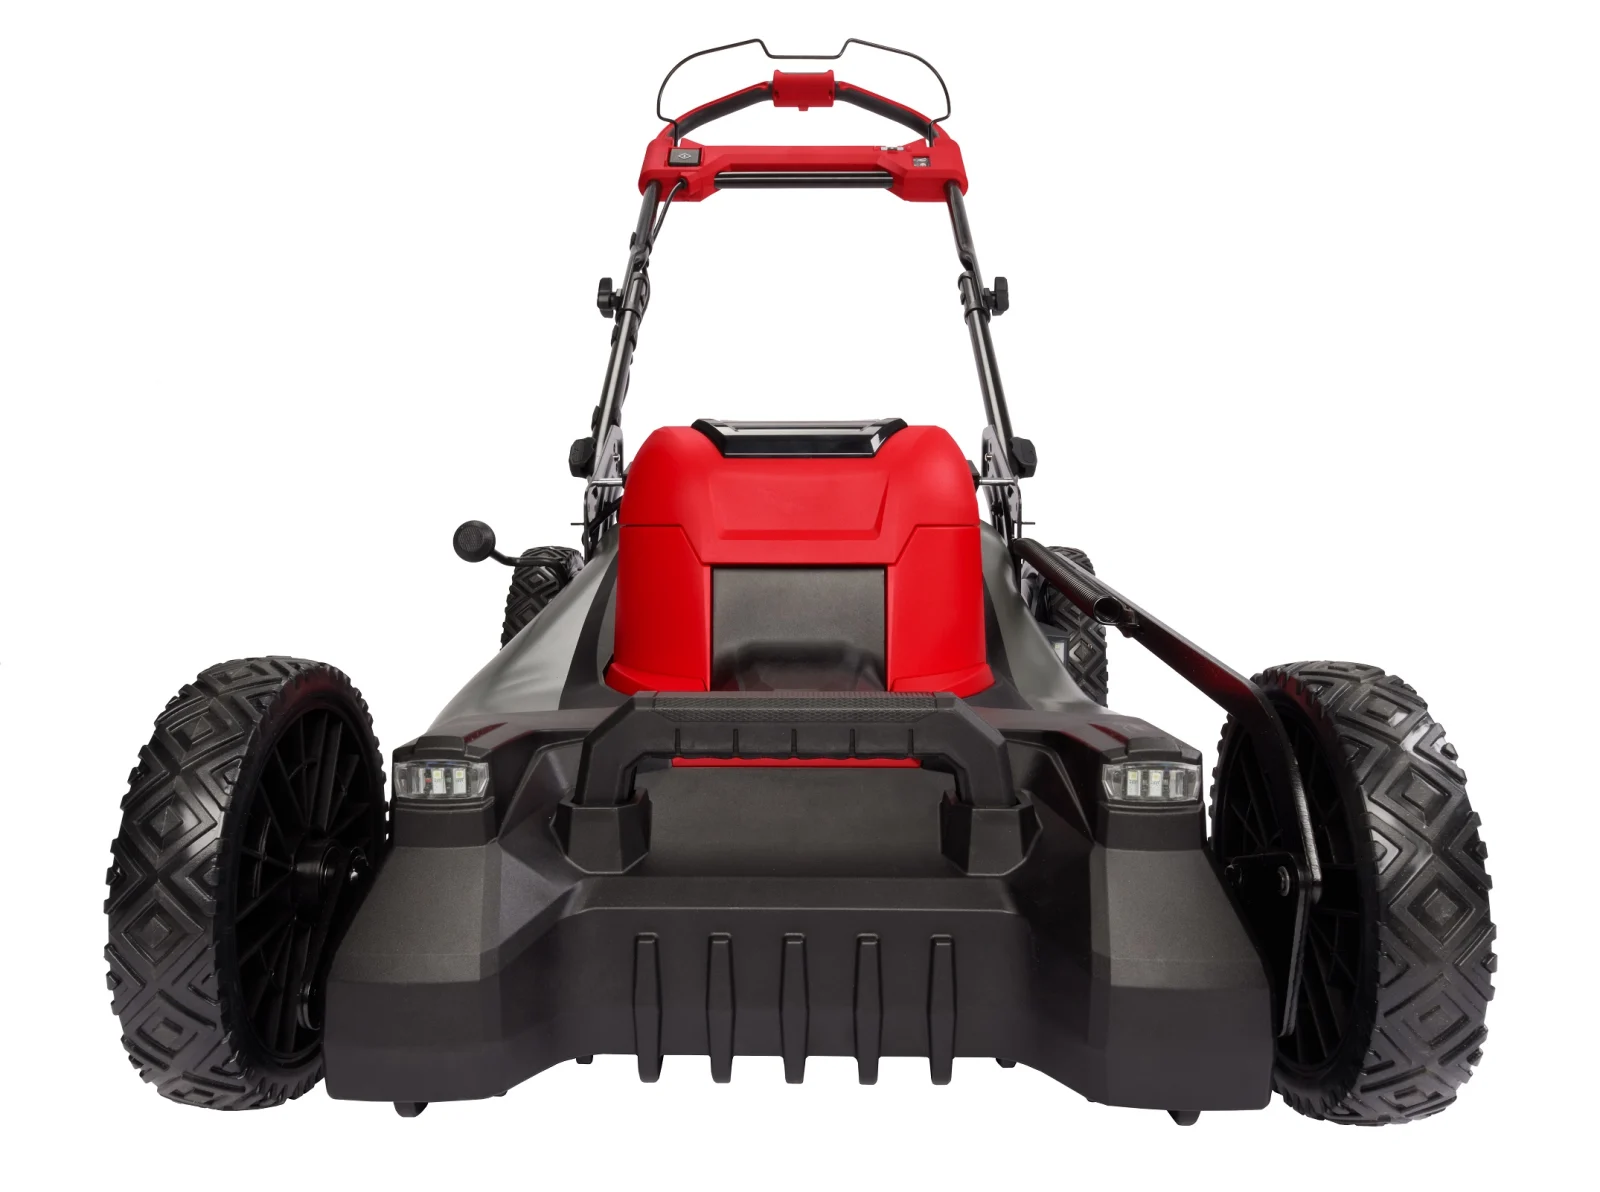 PRO News - April 2023 - Tool Review - Milwaukee Cordless Lawn Mower Kit 5125023 Content Group 3 Image